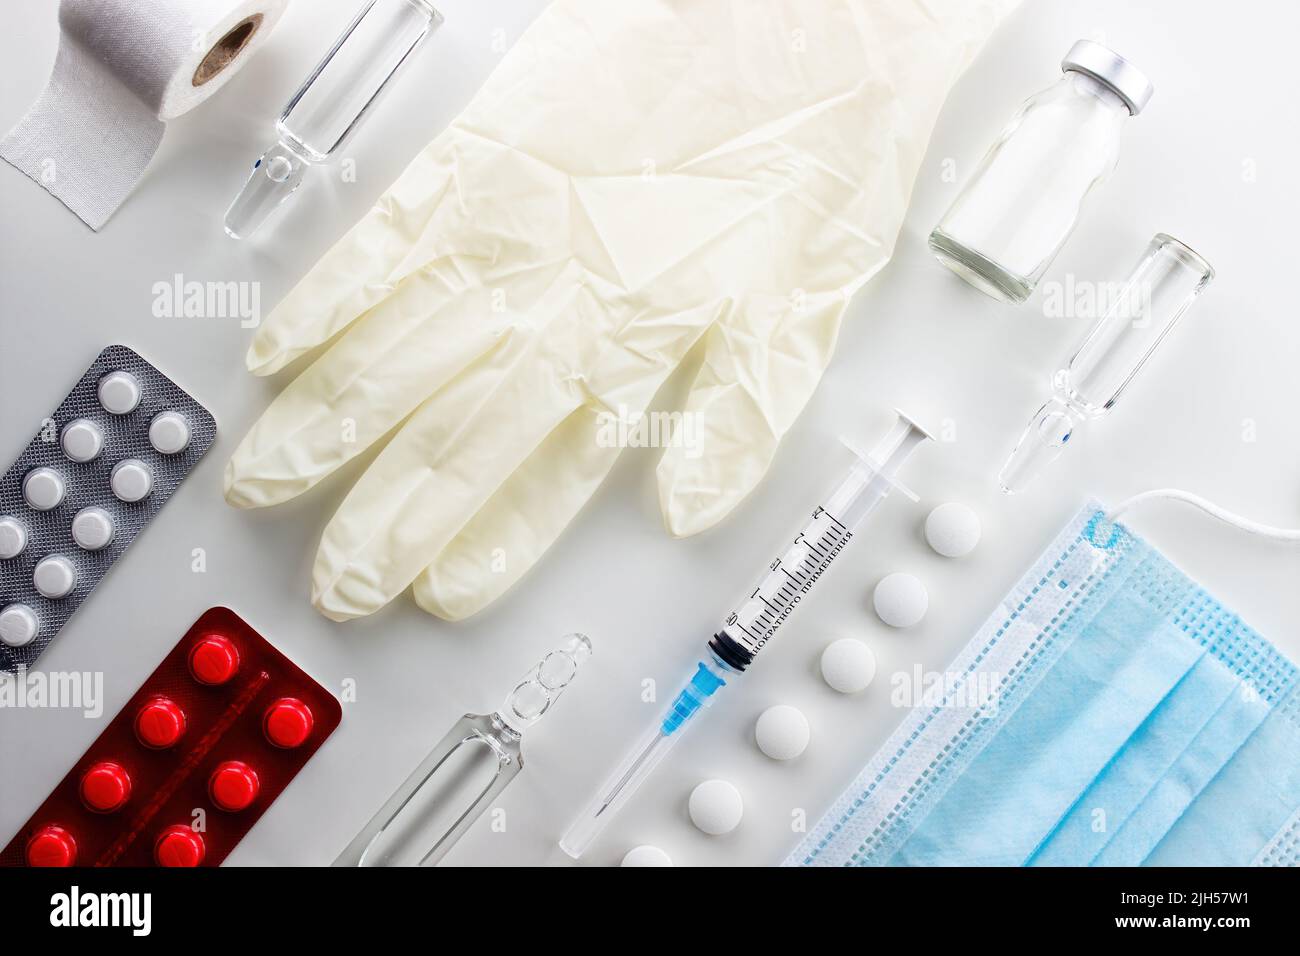 Various medical equipment, ampoules, drugs, tablets, capsules, spray, patch, syringe, vials on a white background. Medicine, pharmacy, hospital, treat Stock Photo